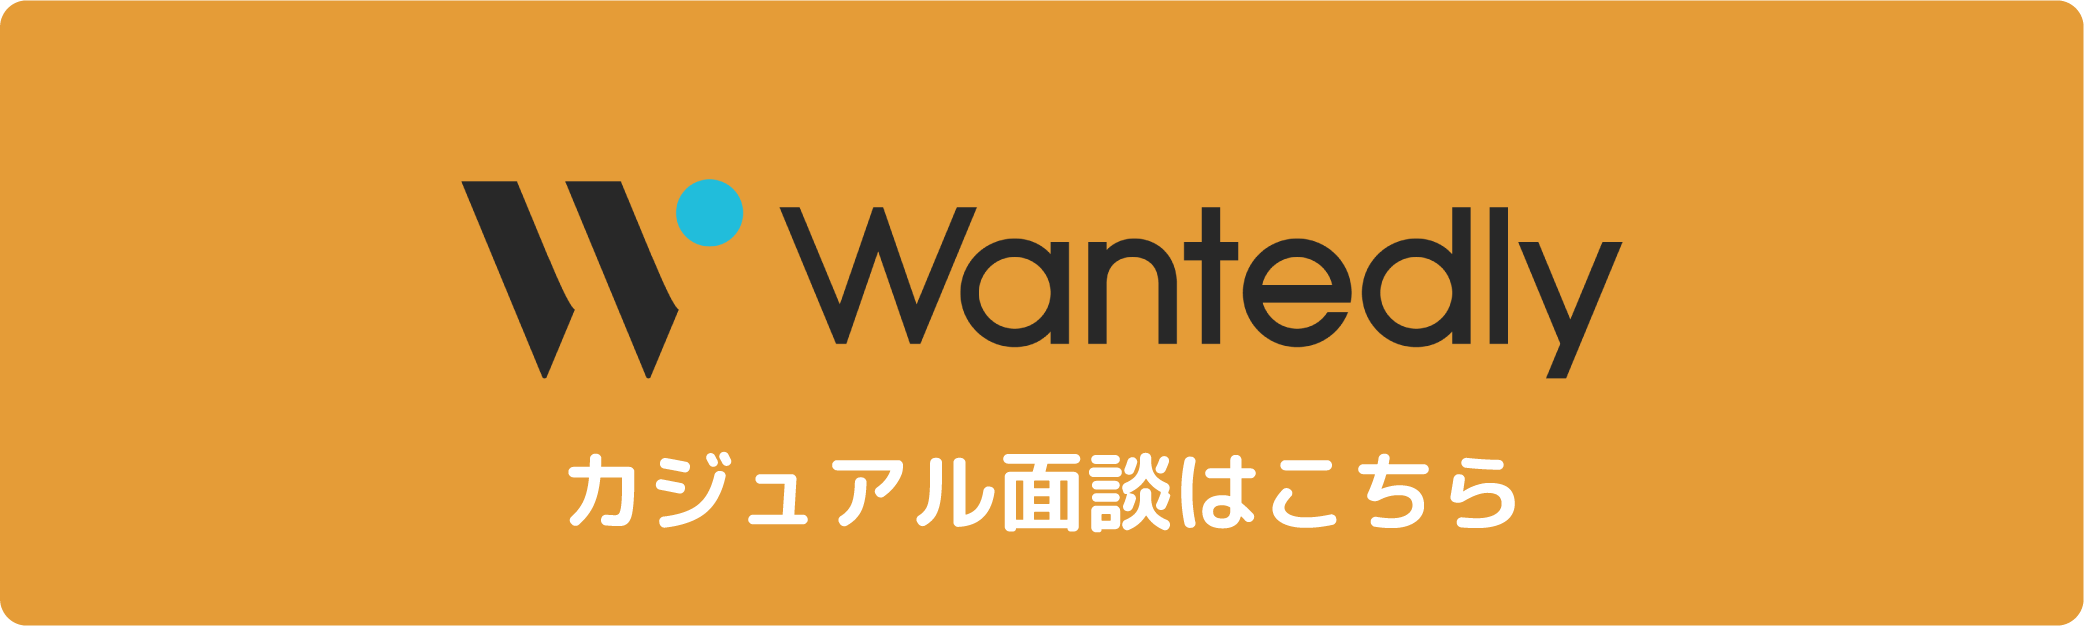 wantedly_banner